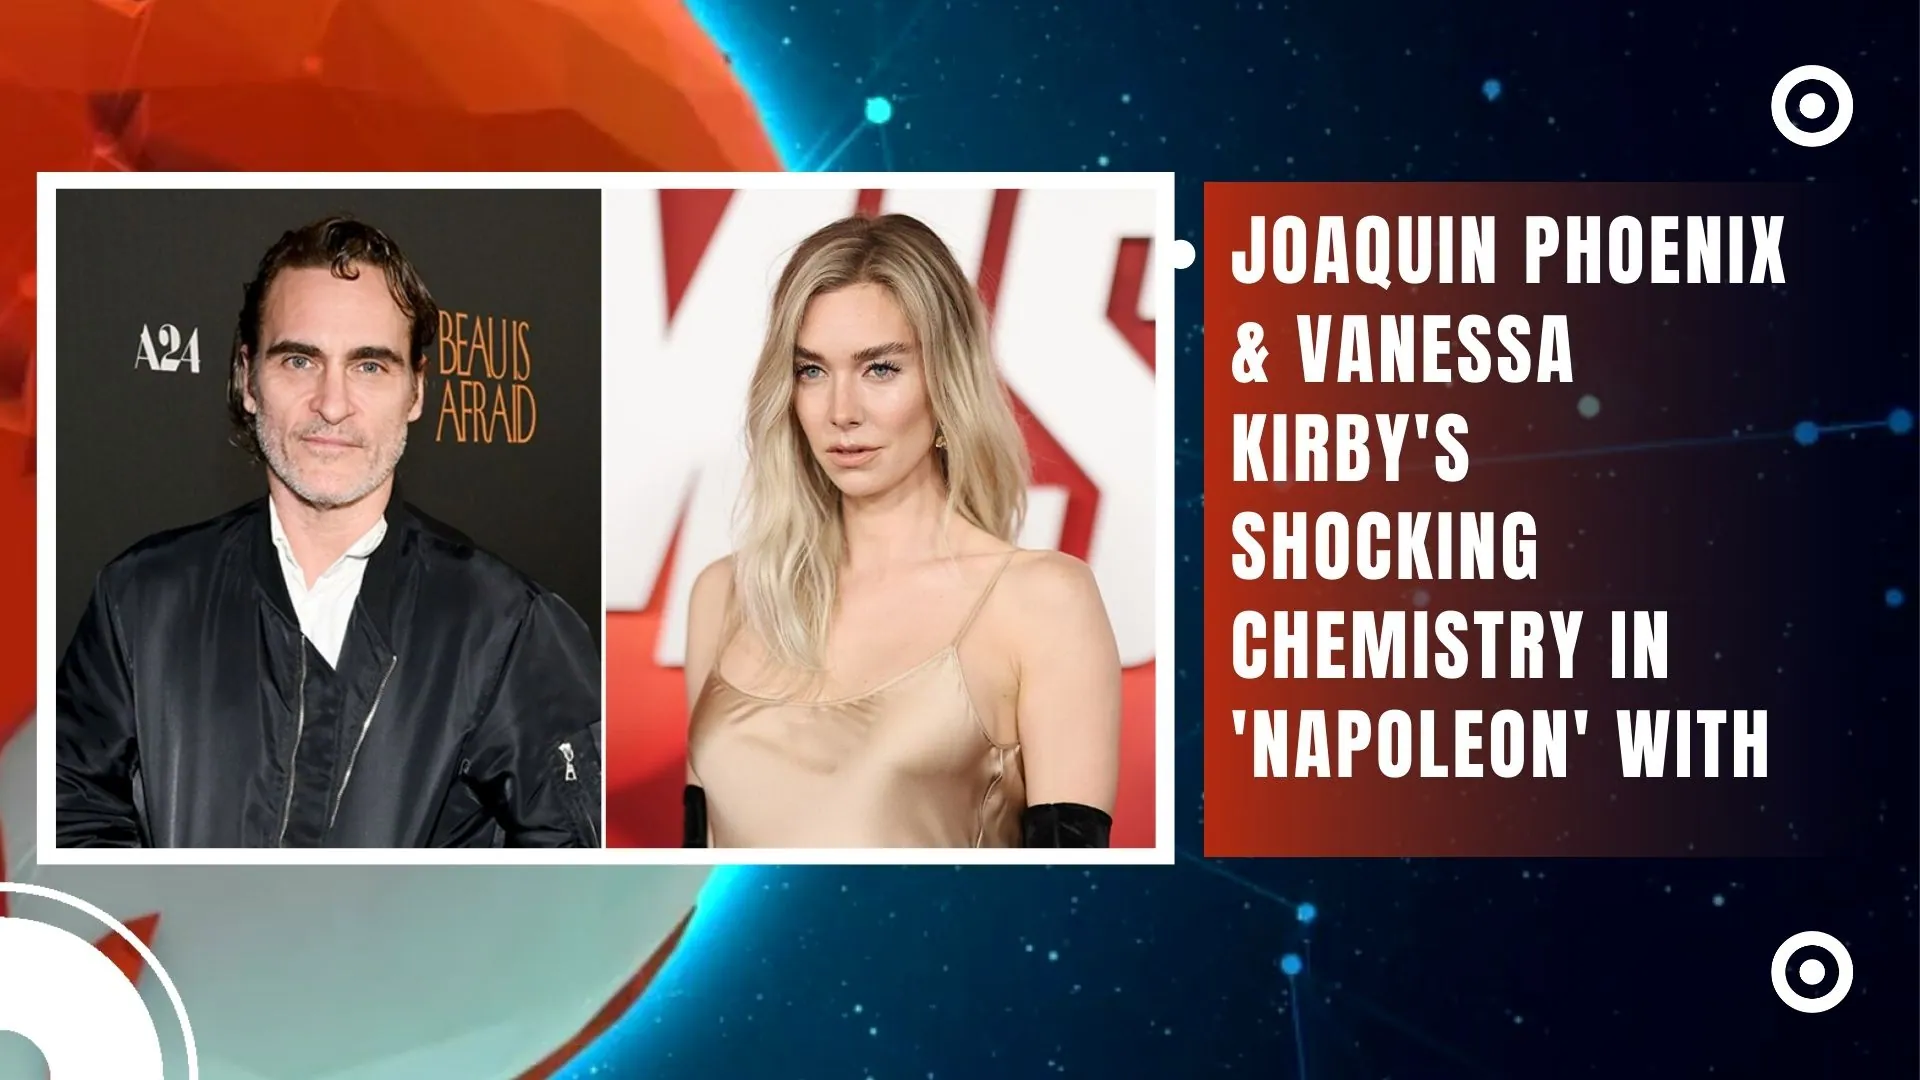 Joaquin Phoenix & Vanessa Kirby's Shocking Chemistry in 'Napoleon' with Unconventional Filming Approach